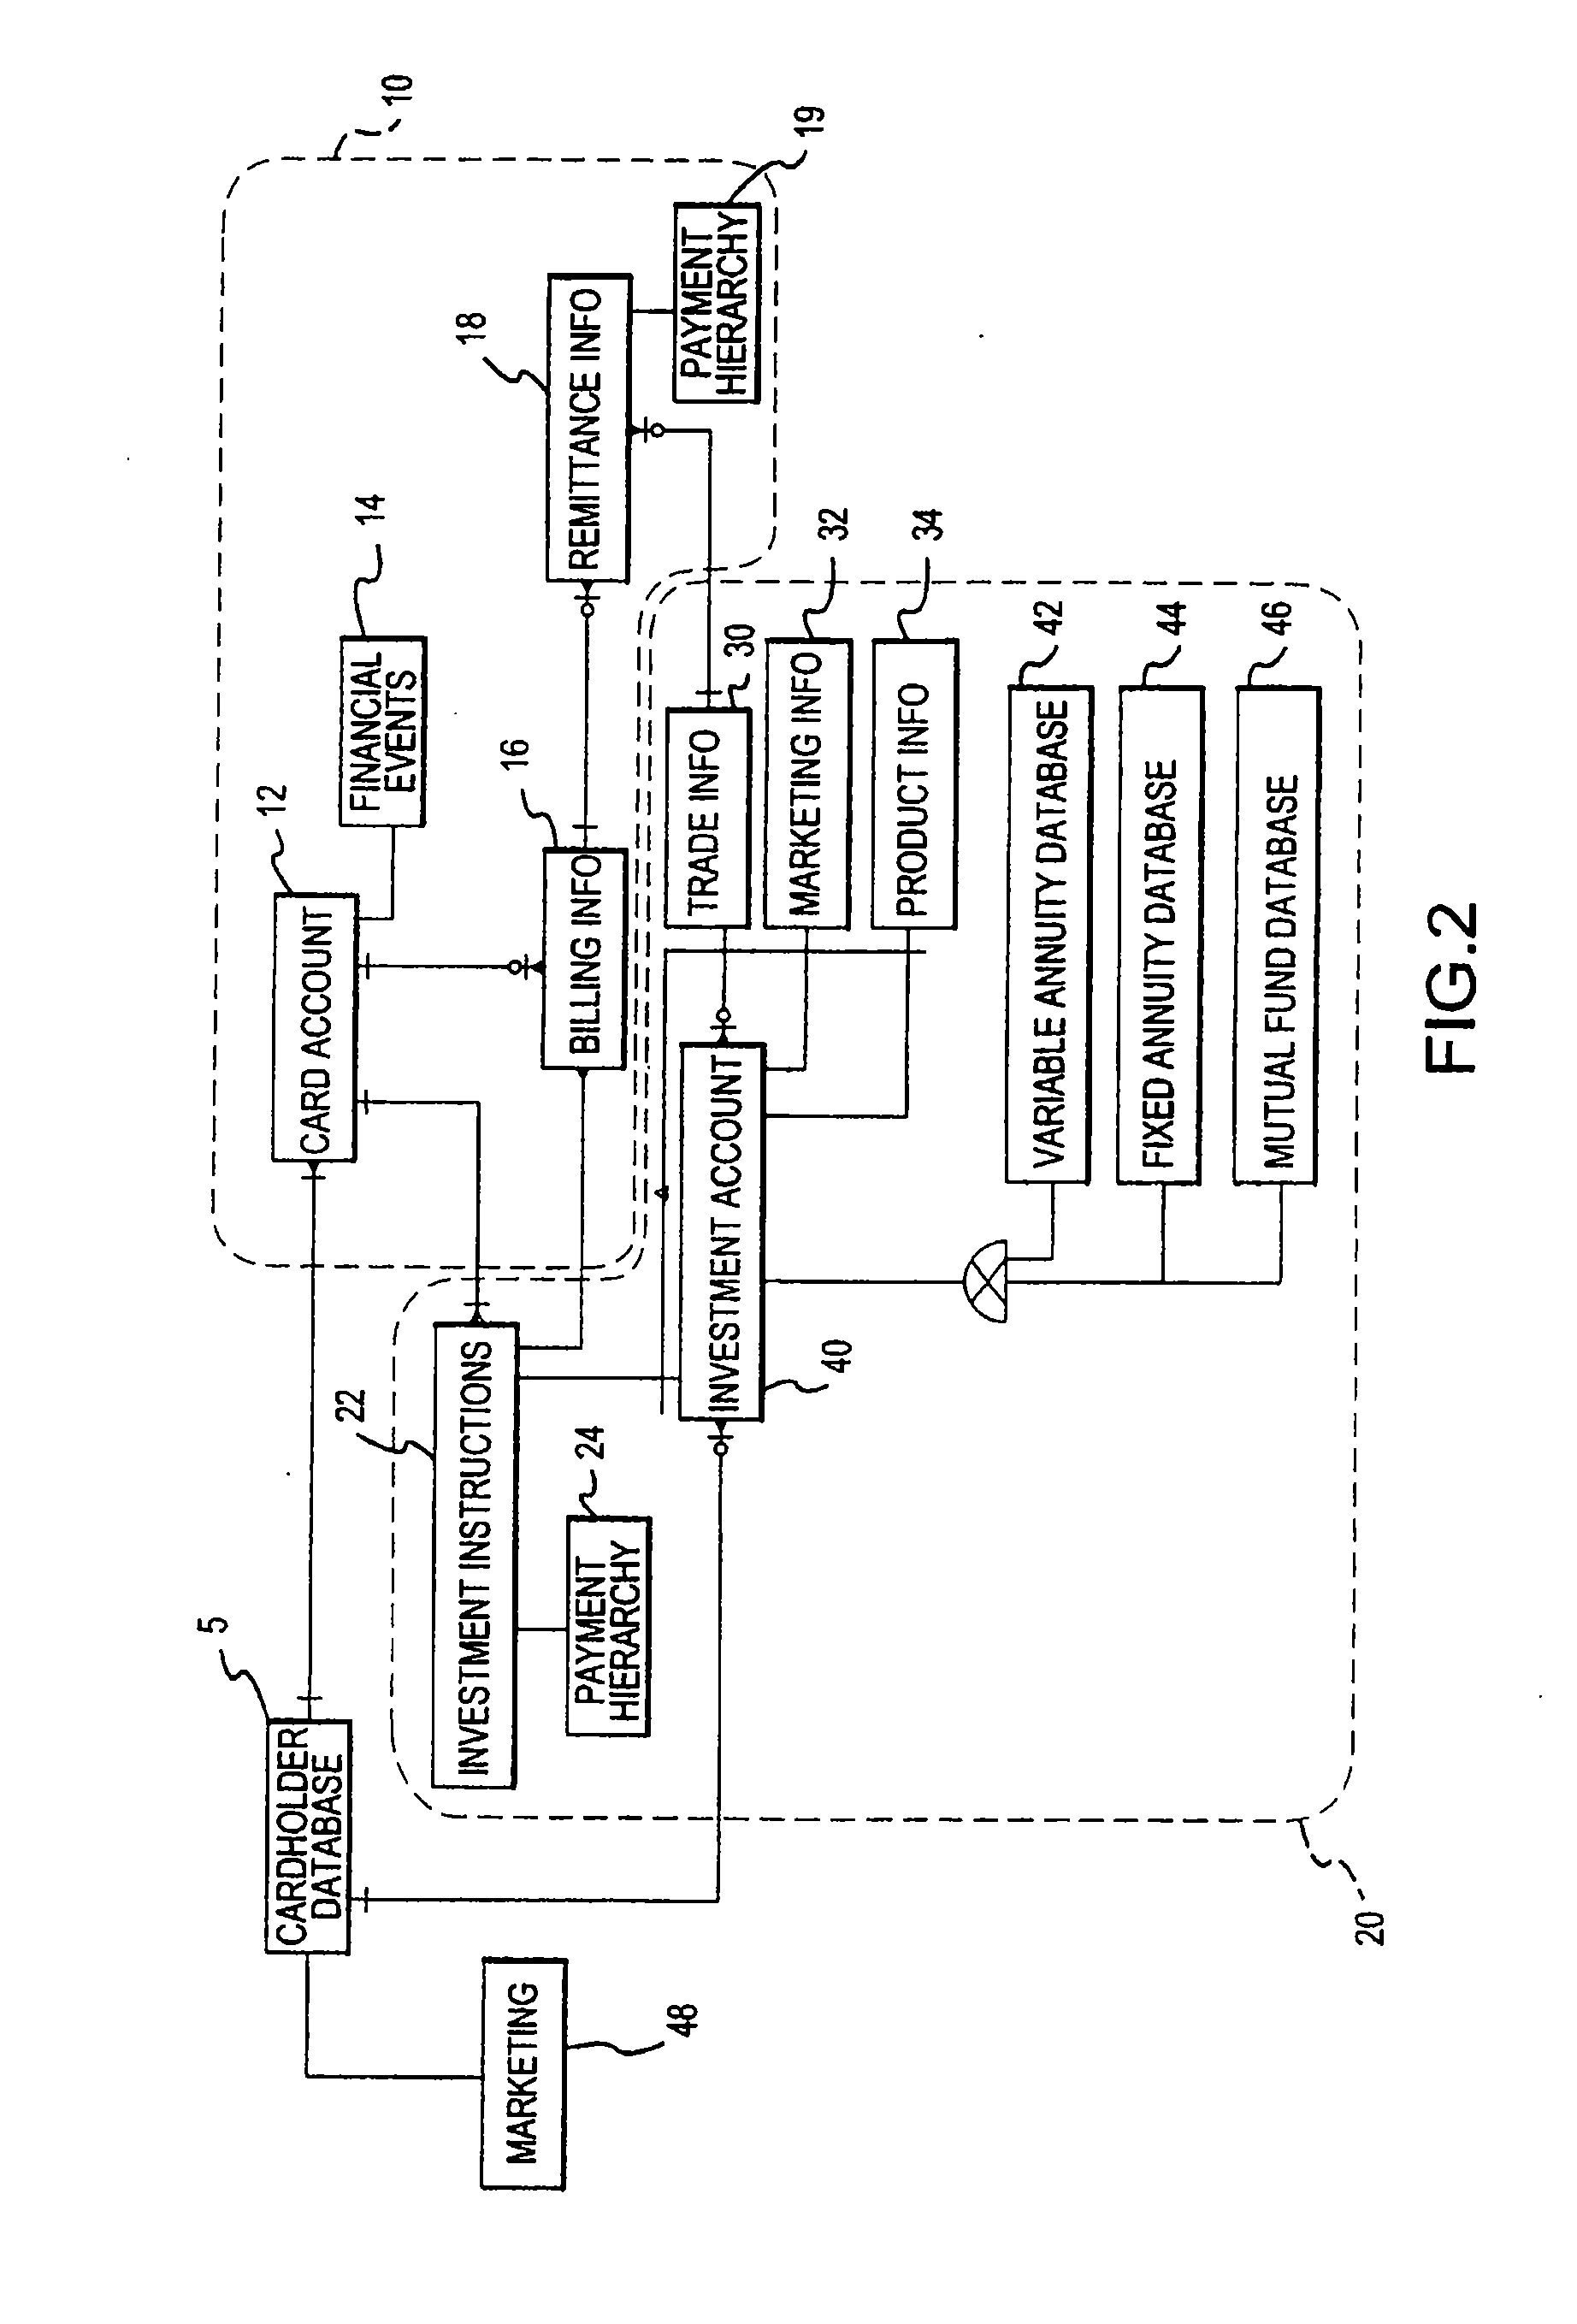 System and method for dividing a remittance and distributing a portion of the funds to multiple investment products